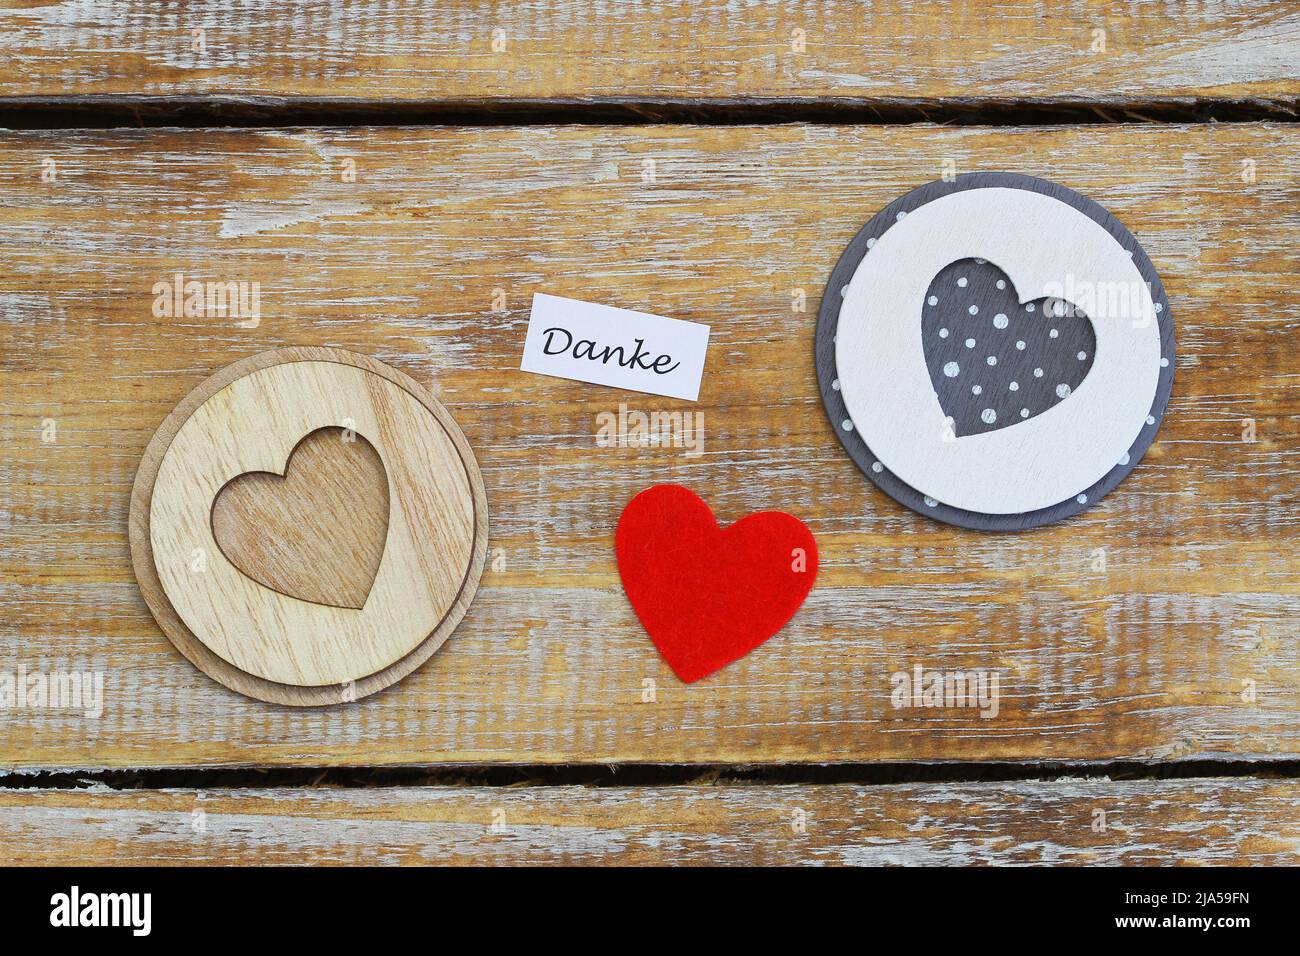 Danke (thank you in German) card with three hearts on rustic wooden surface Stock Photo